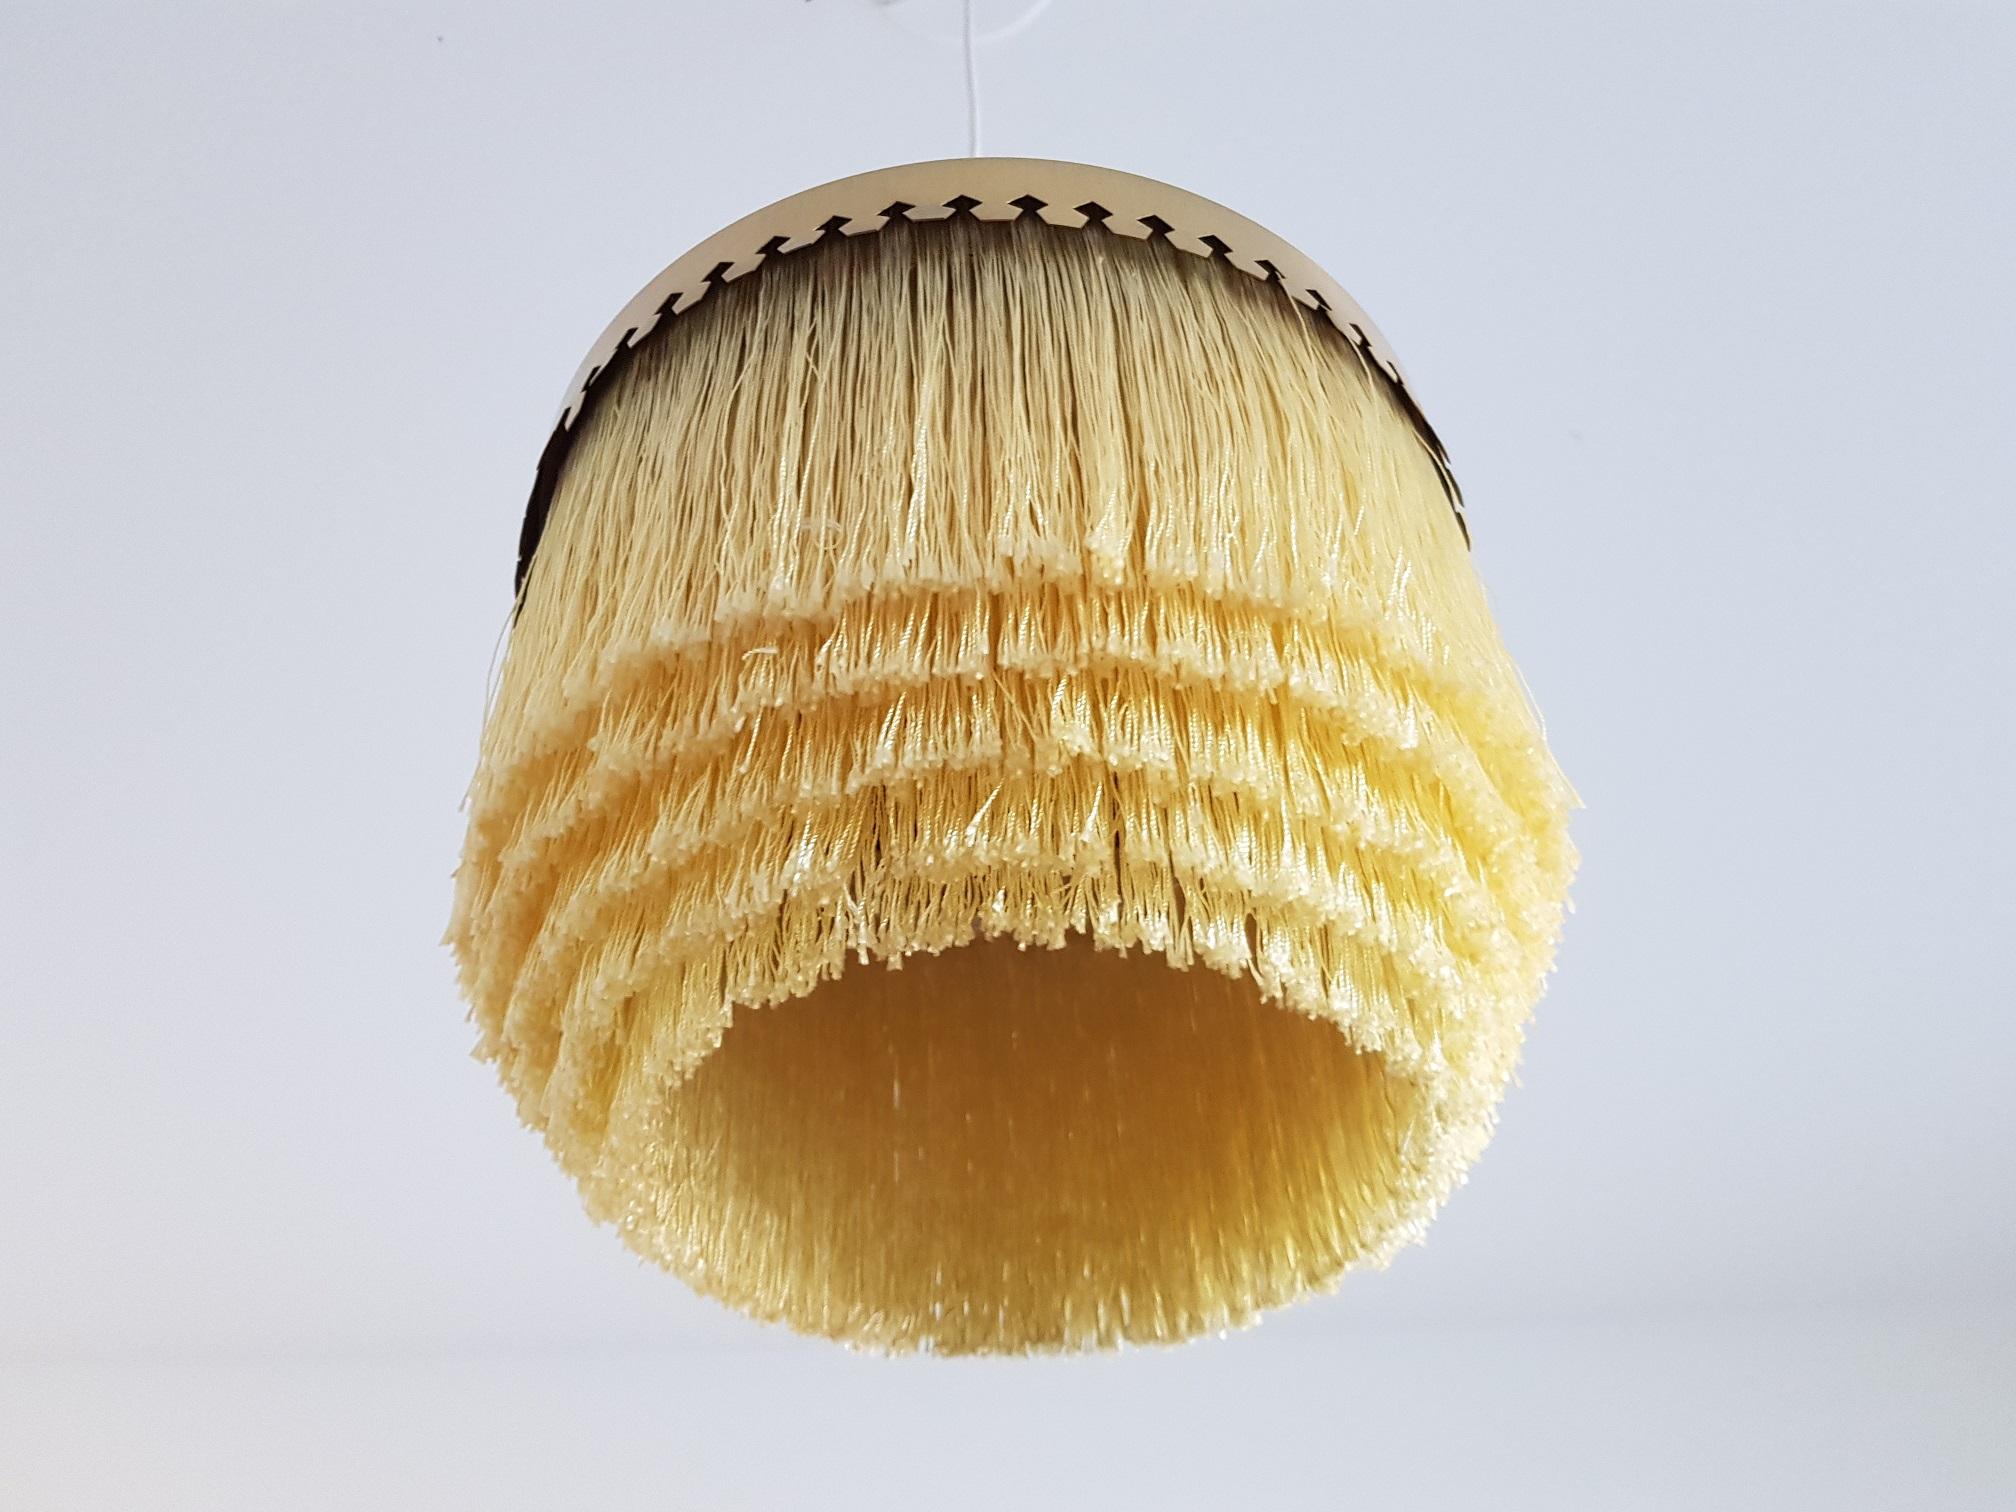 Vintage yellow fringe lamp in brass. Produced in the 1960s by Hans-Agne Jakobsson AB in Markaryd Sweden. This famous ceiling lamp has had an unbelievable revival the last few years and is now found in the most iconic hotel lounges, private homes,